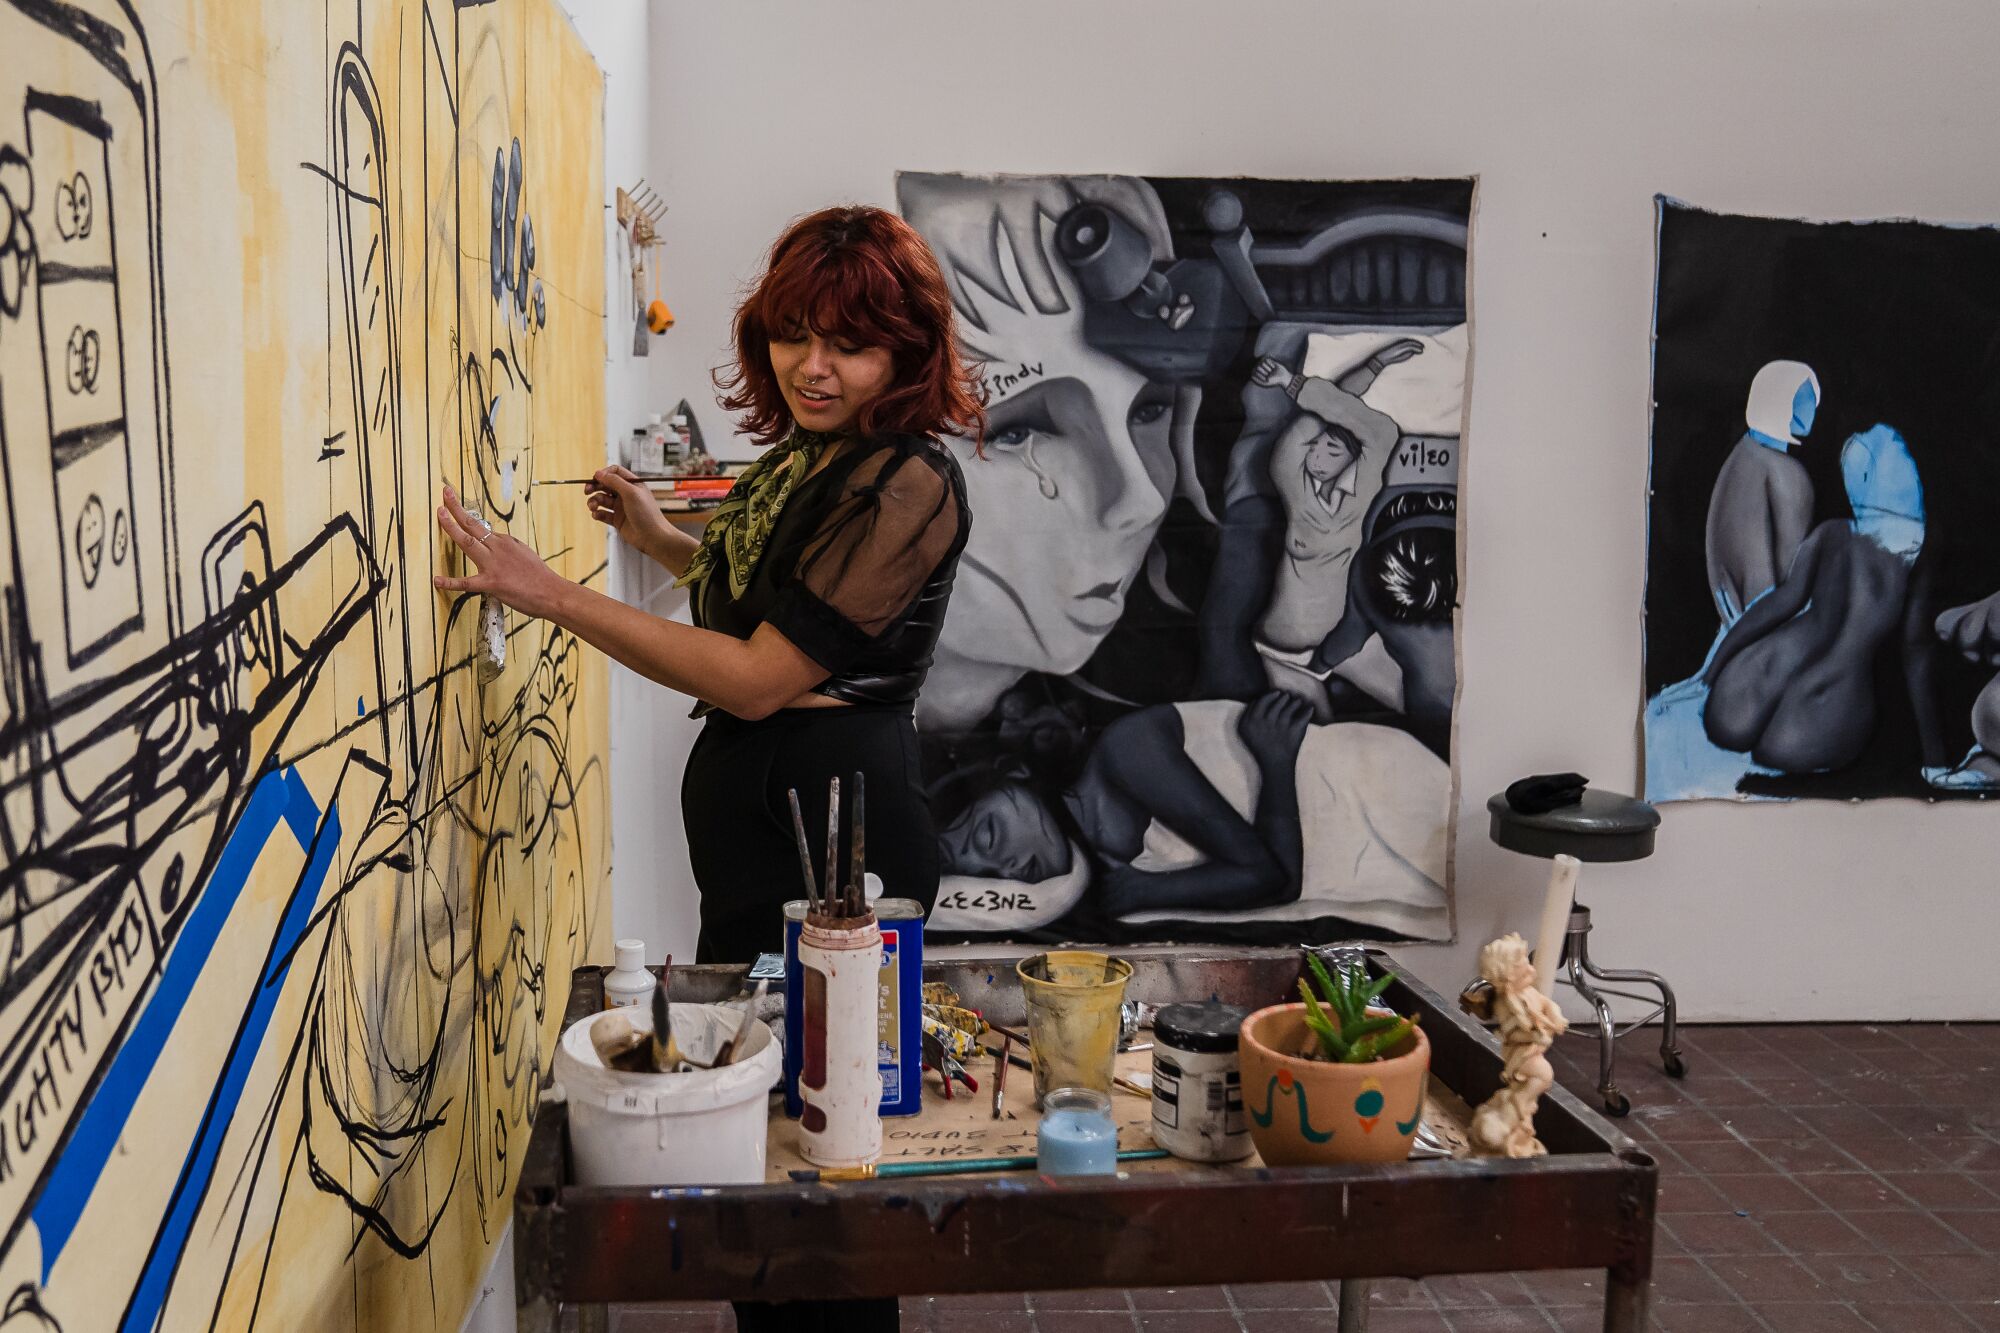 Artist and Musician Vanessa Rishel paints on a canvas on the wall at Bread & Salt.